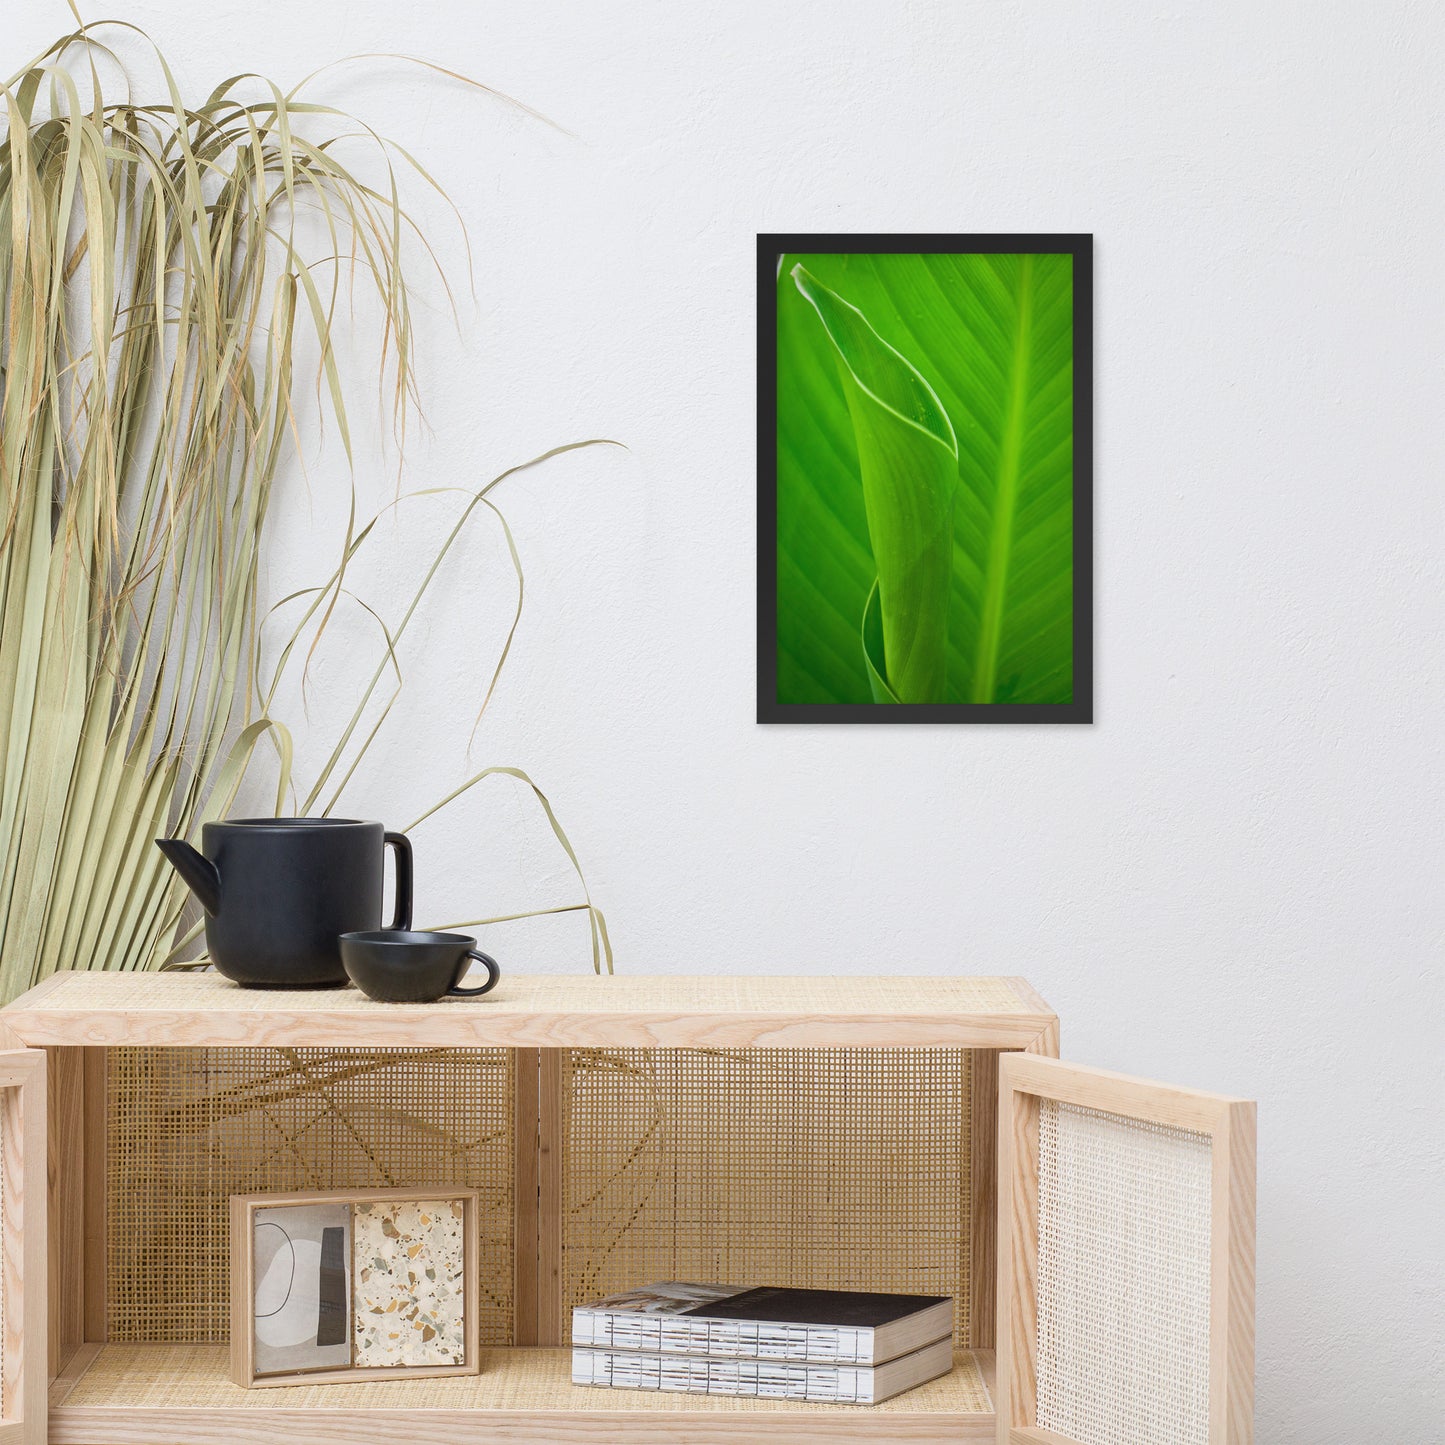 Leaves of Canna Lily Botanical Nature Photo Framed Wall Art Print